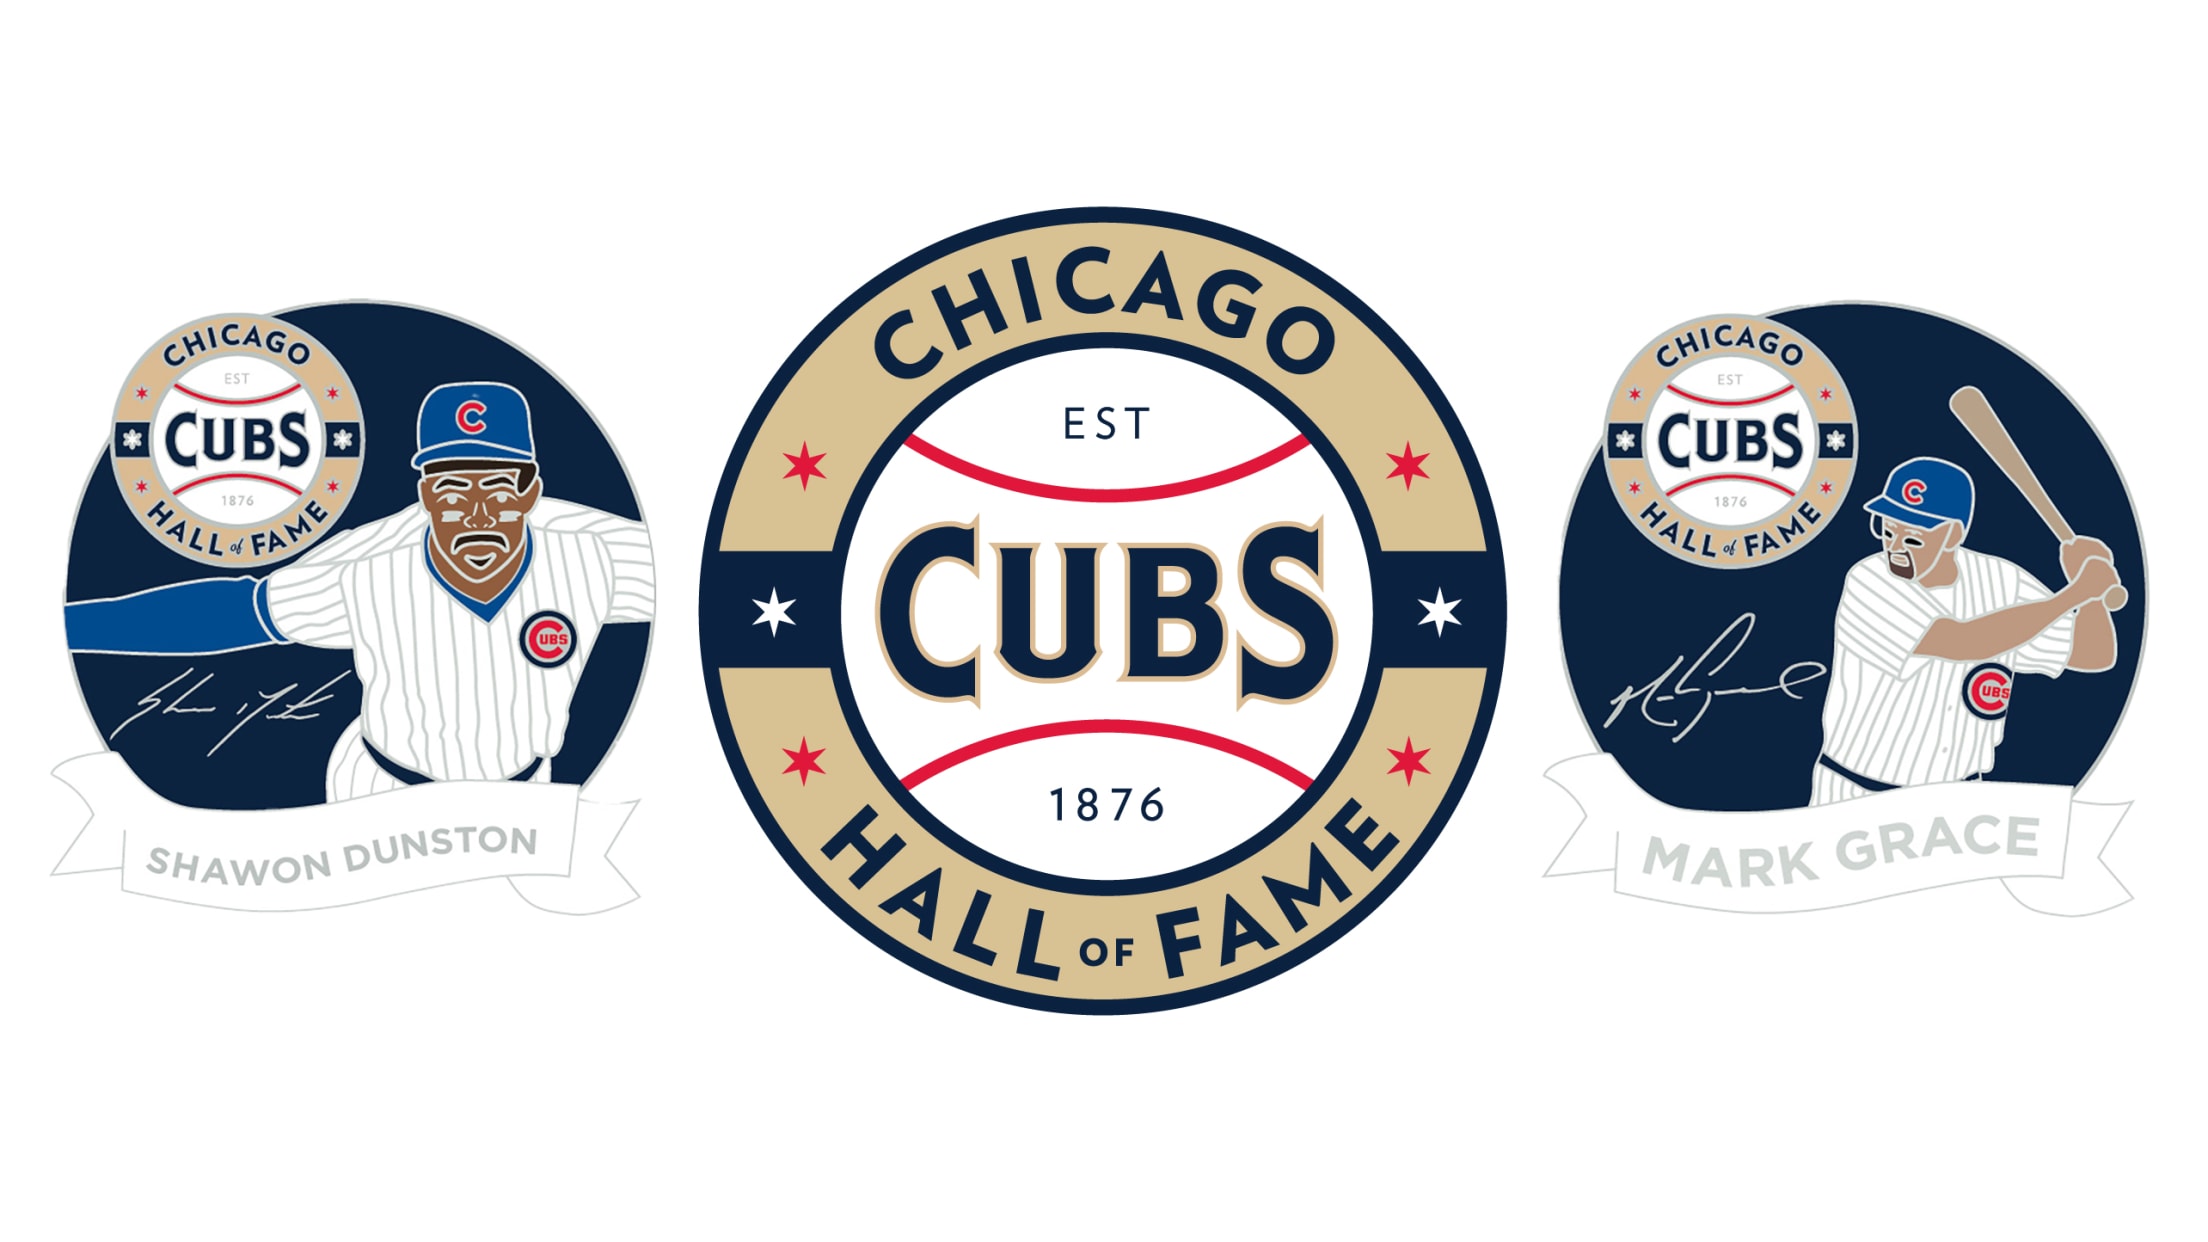 Chicago Cubs on X: Celebrate Cubs legends Mark Grace and Shawon Dunston at  Wrigley Field with us September 8-10! Enjoy special recognitions and  giveaways to honor these fan-favorite players as they are